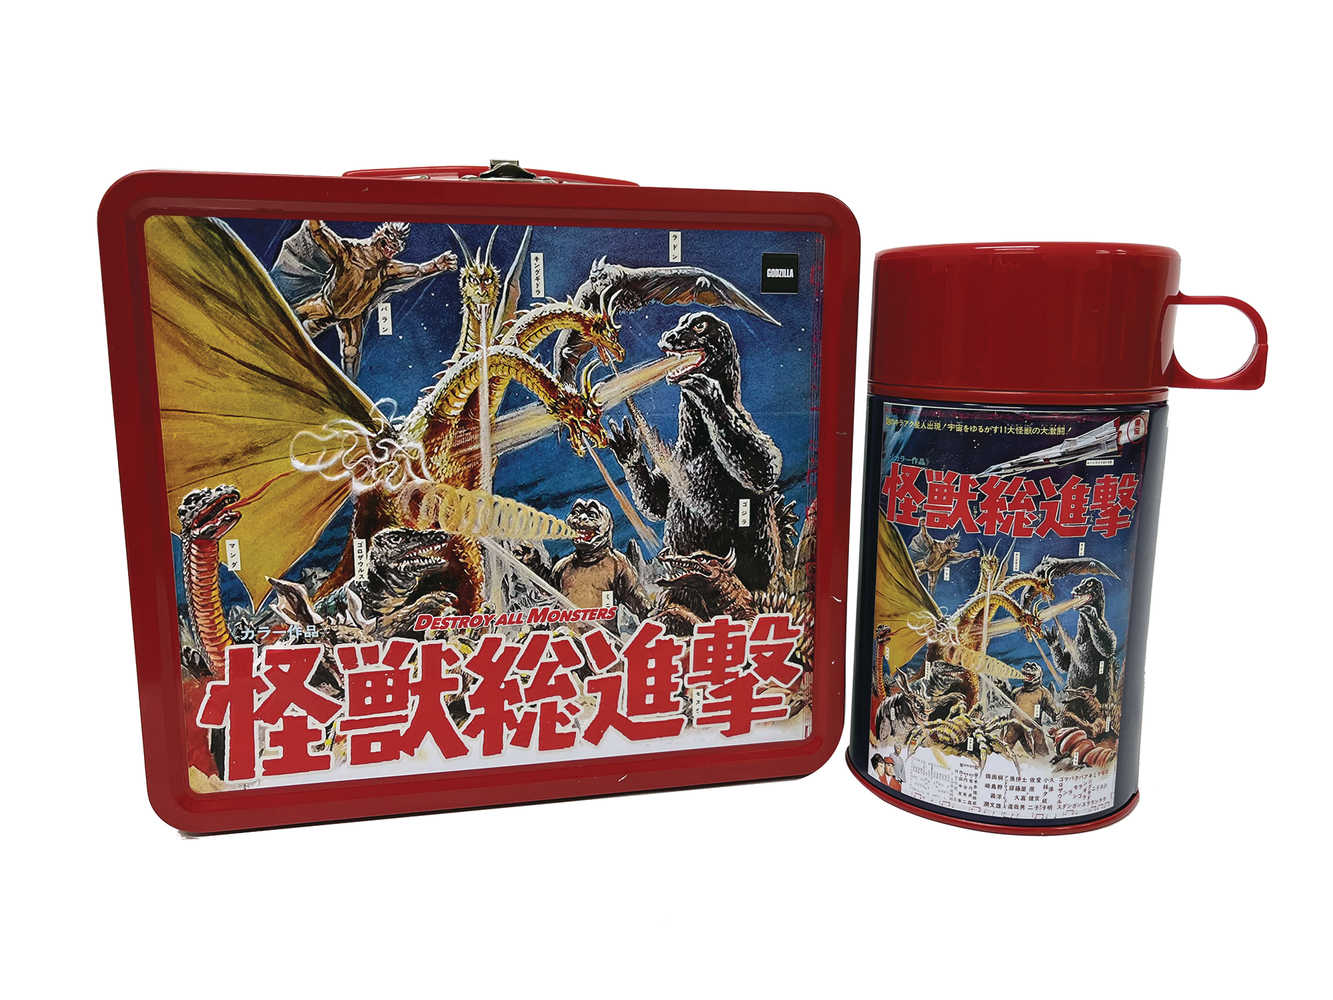 Tin Titans Godzilla Destroy All Monsters Previews Exclusive Lunchbox & Bev C